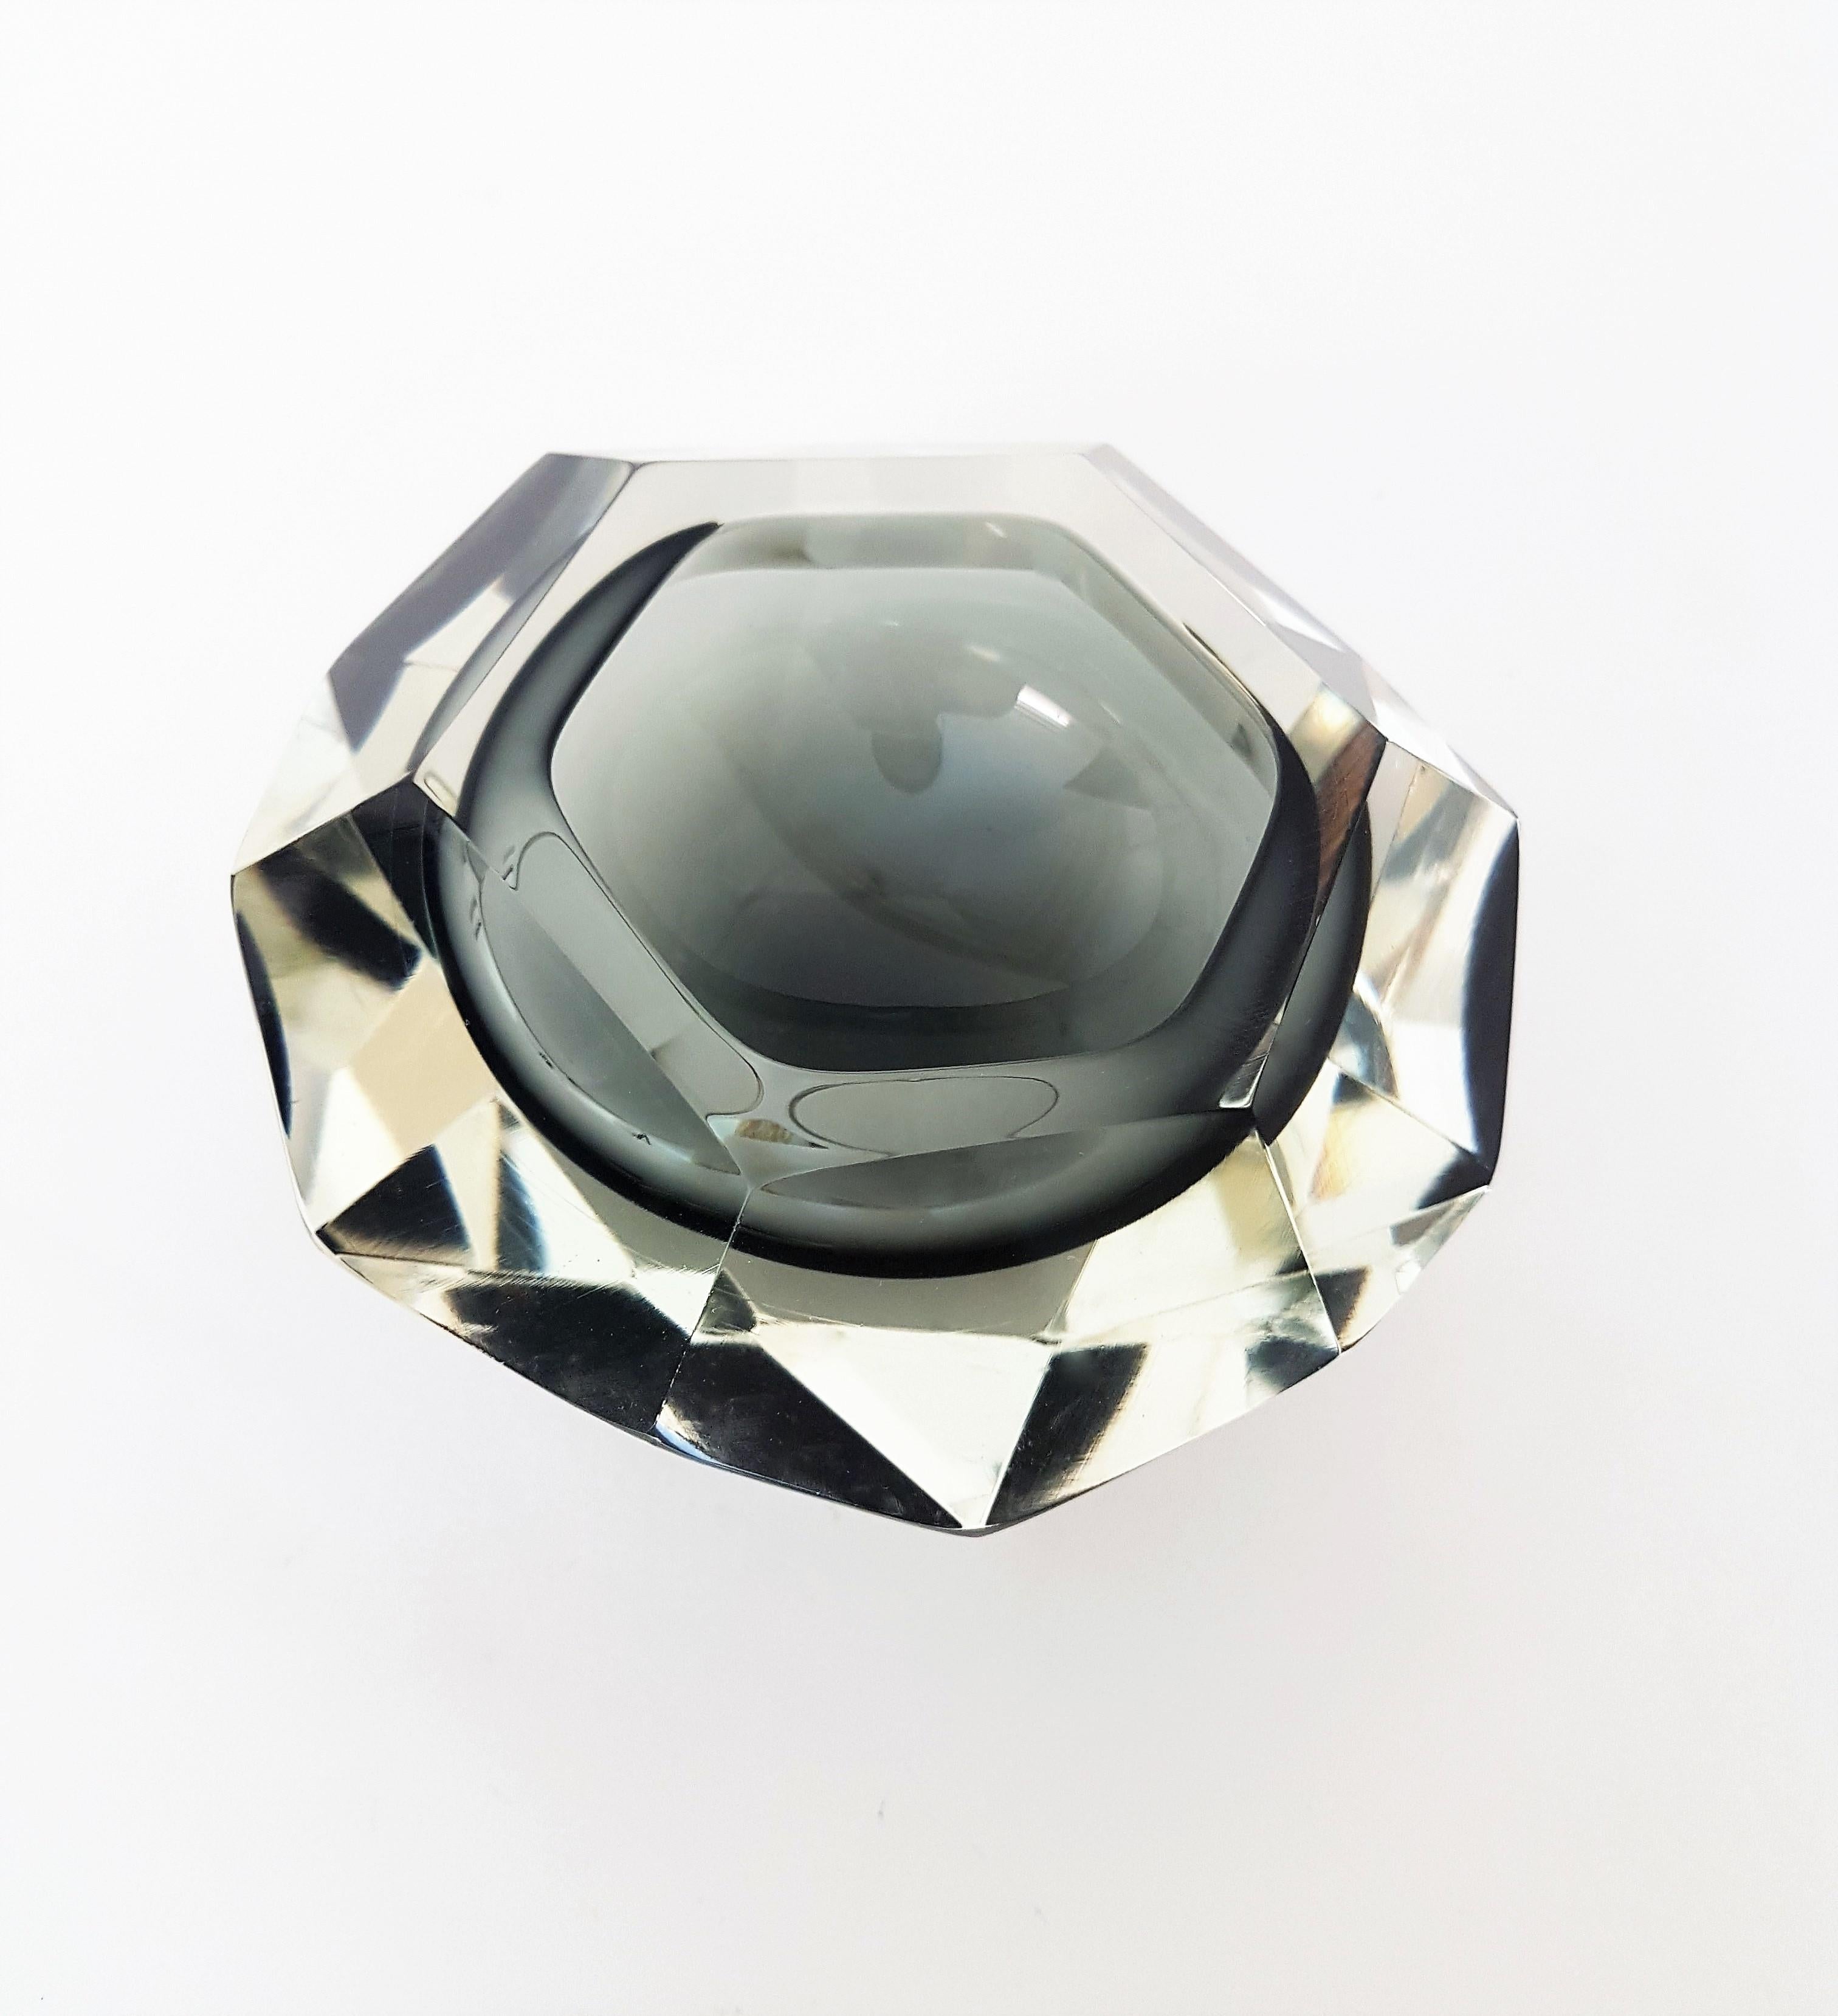 Flavio Poli Sommerso Smoked Grey & Clear Faceted Diamond Shape Murano Glass Bowl 4